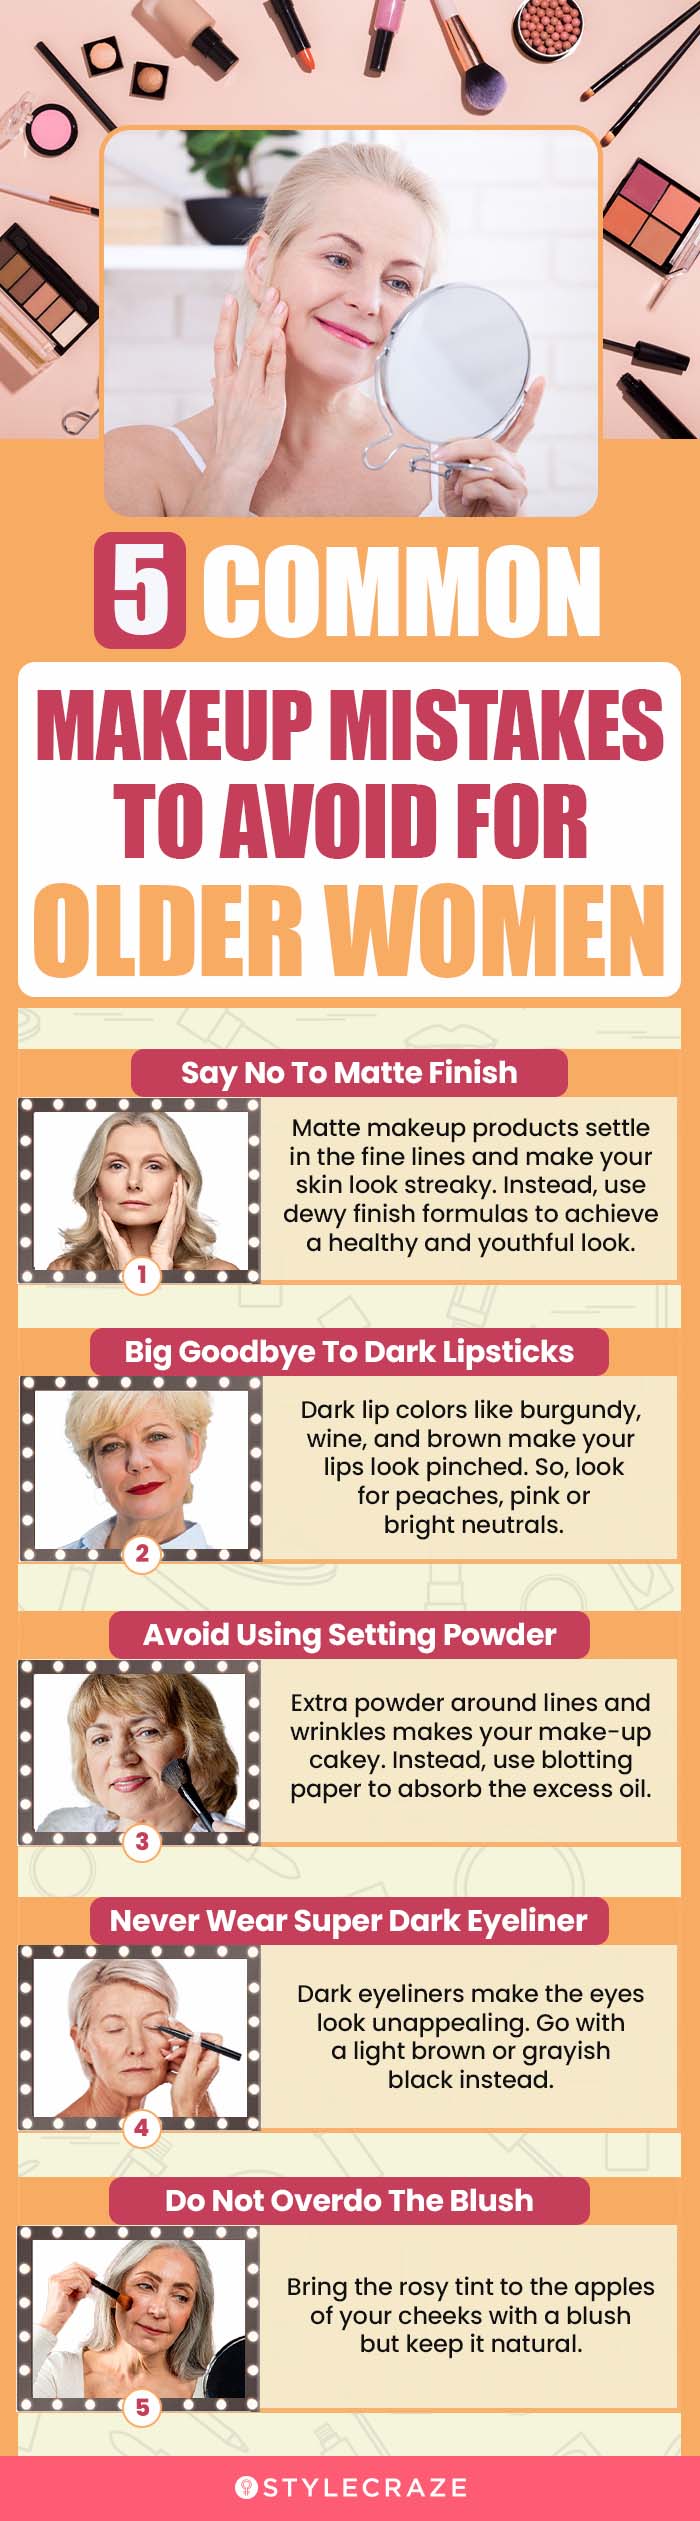 5 Common Makeup Mistakes To Avoid For Older Women (infographic)